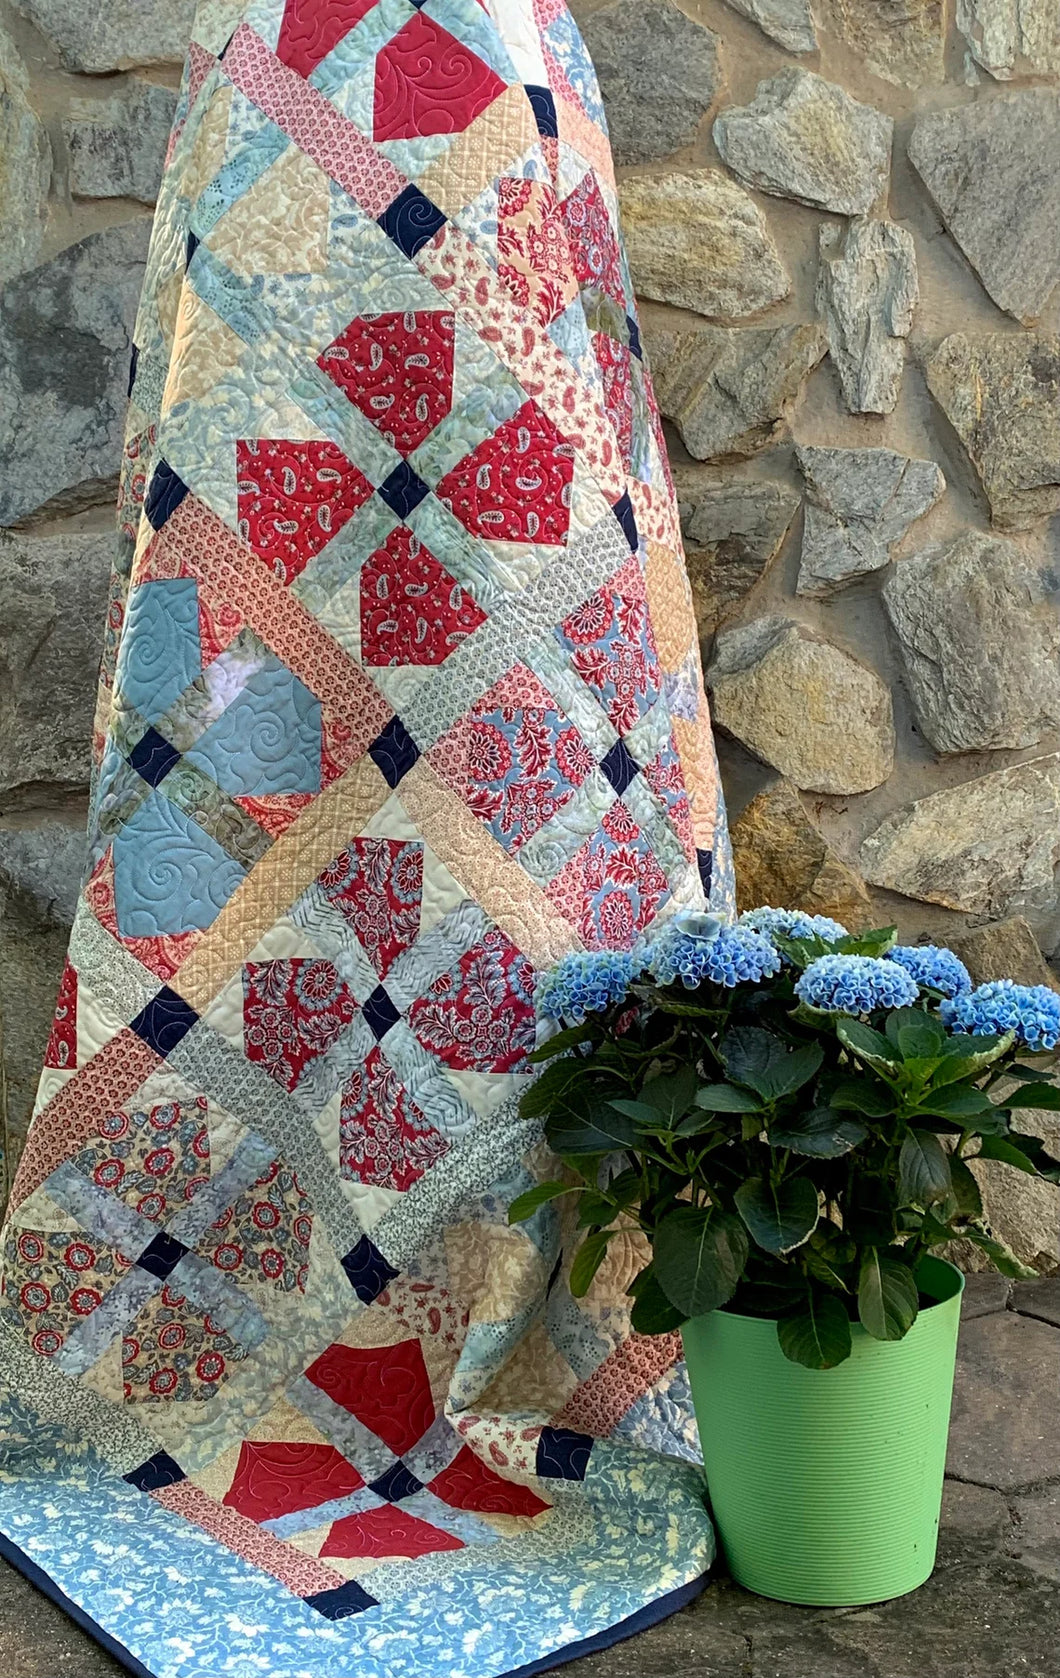 Available now: Beautiful handmade quilt, patchwork flowers